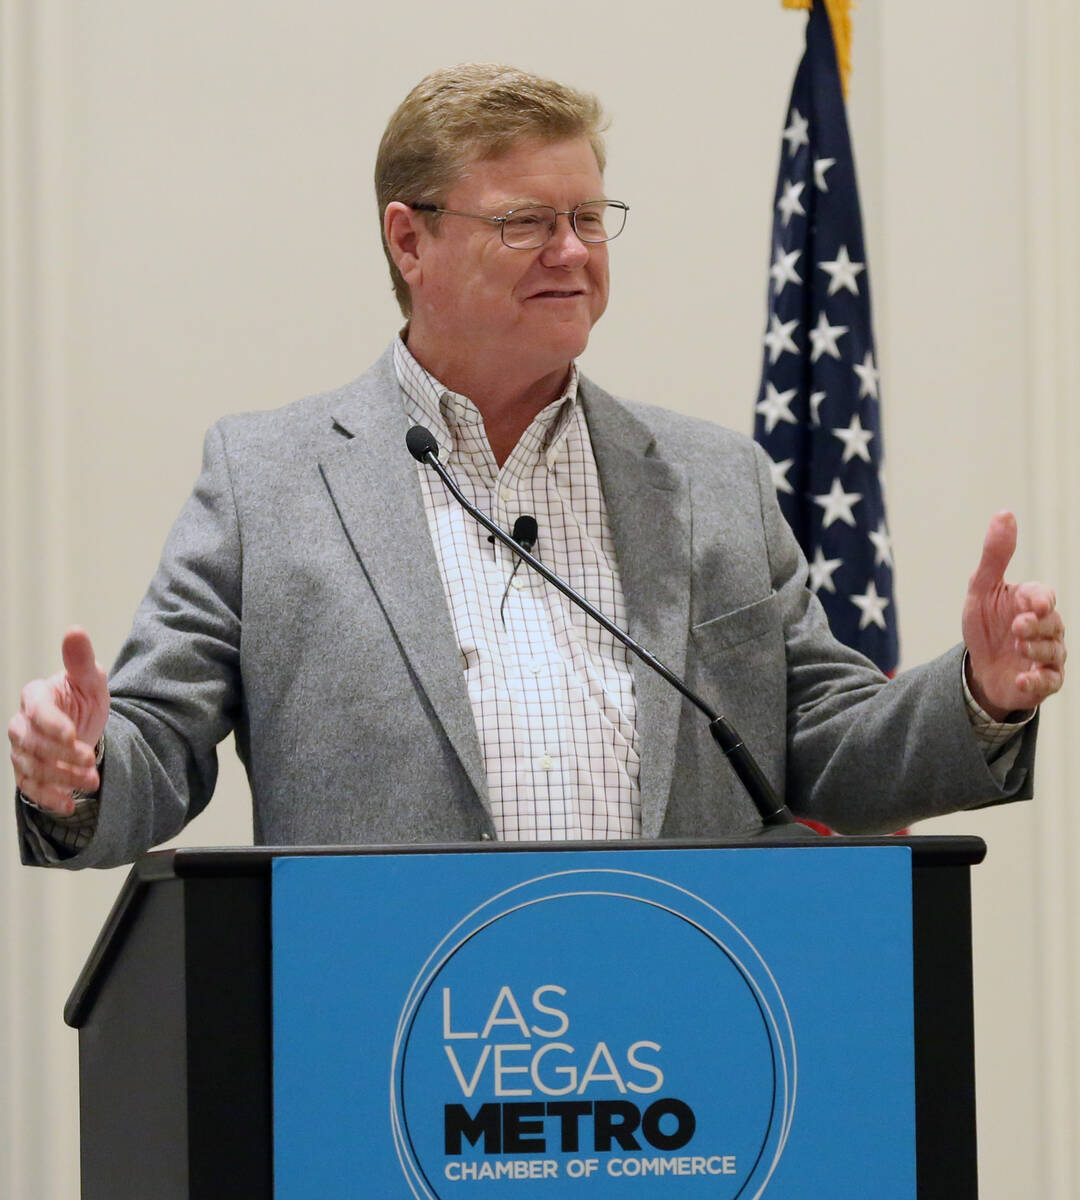 Rep. Mark Amodei, R-Nev., speaks during the Las Vegas Metro Chamber of Commerce's Eggs and Issu ...